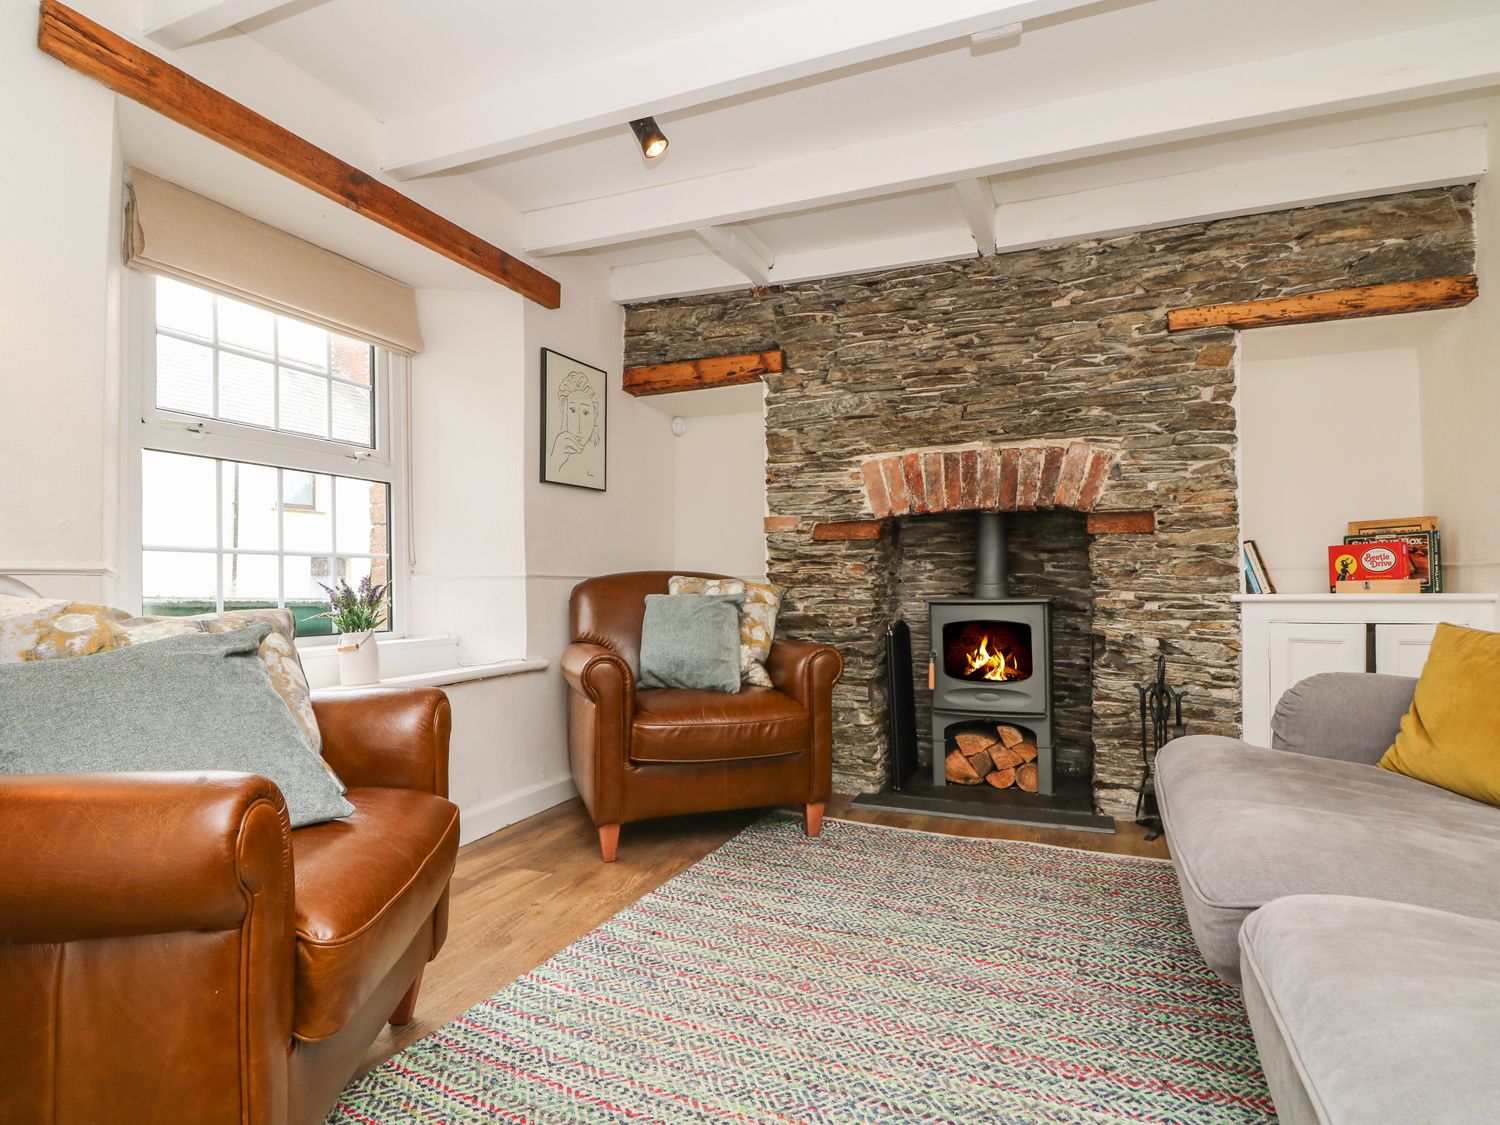 Gwent Cottage, Near Padstow - Cornwall - 965177 - photo 1